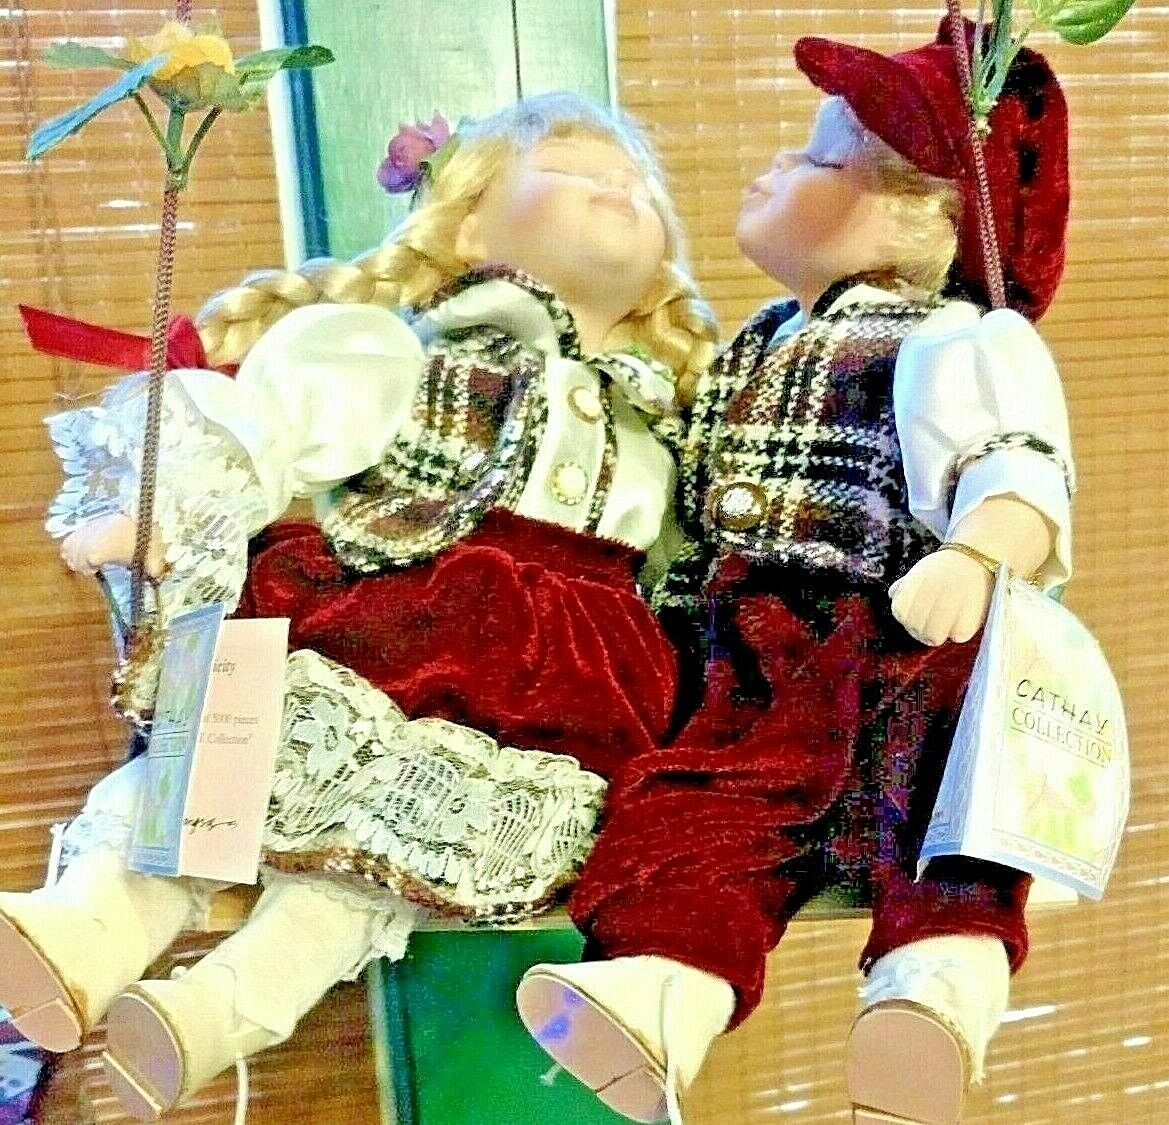 Vintage Cathy Collection Porcelain Kissing Dolls in Swing Robert and Judy Dolls